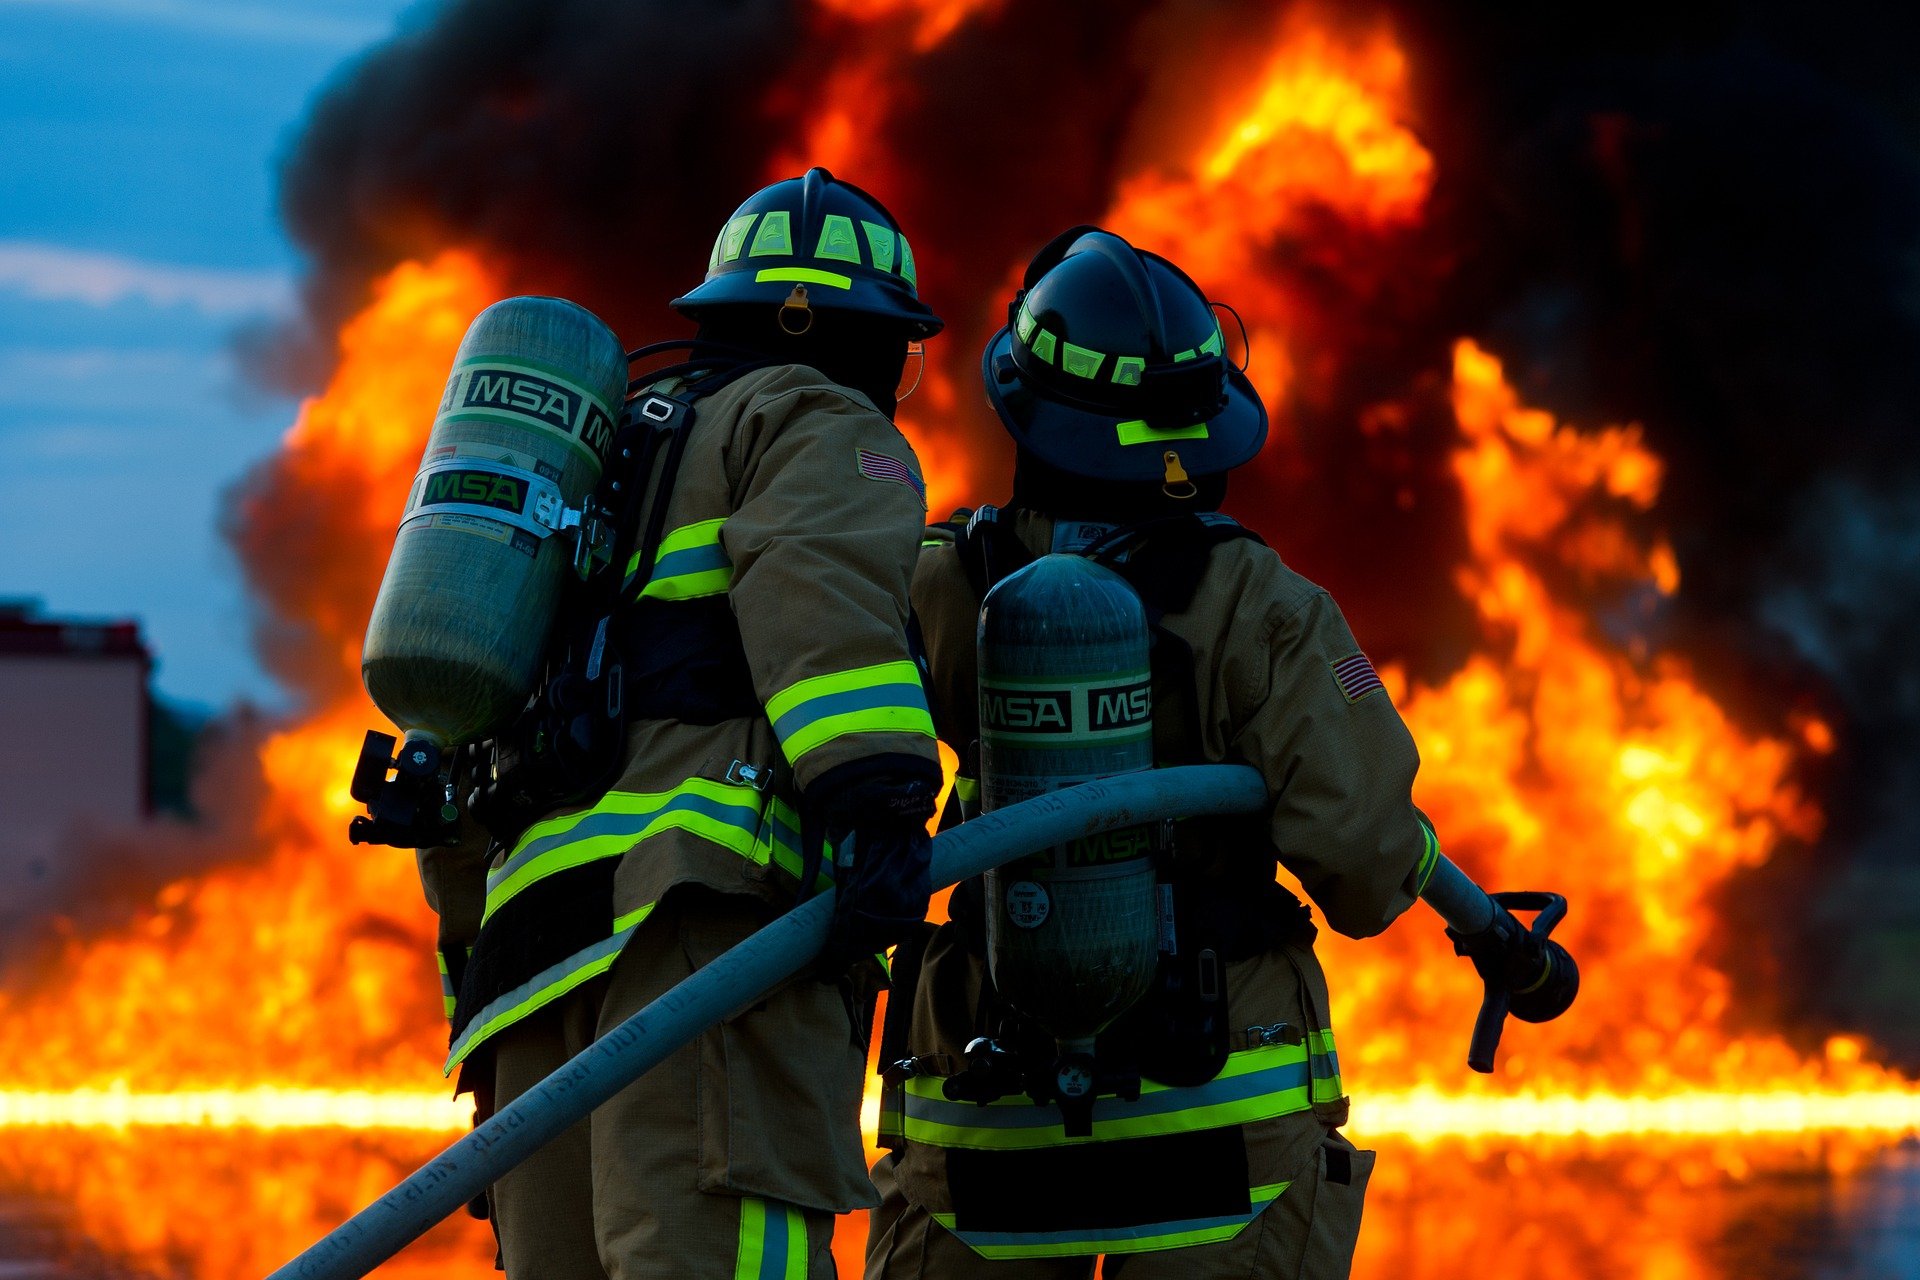 Sensor detects if firefighter gear is safe